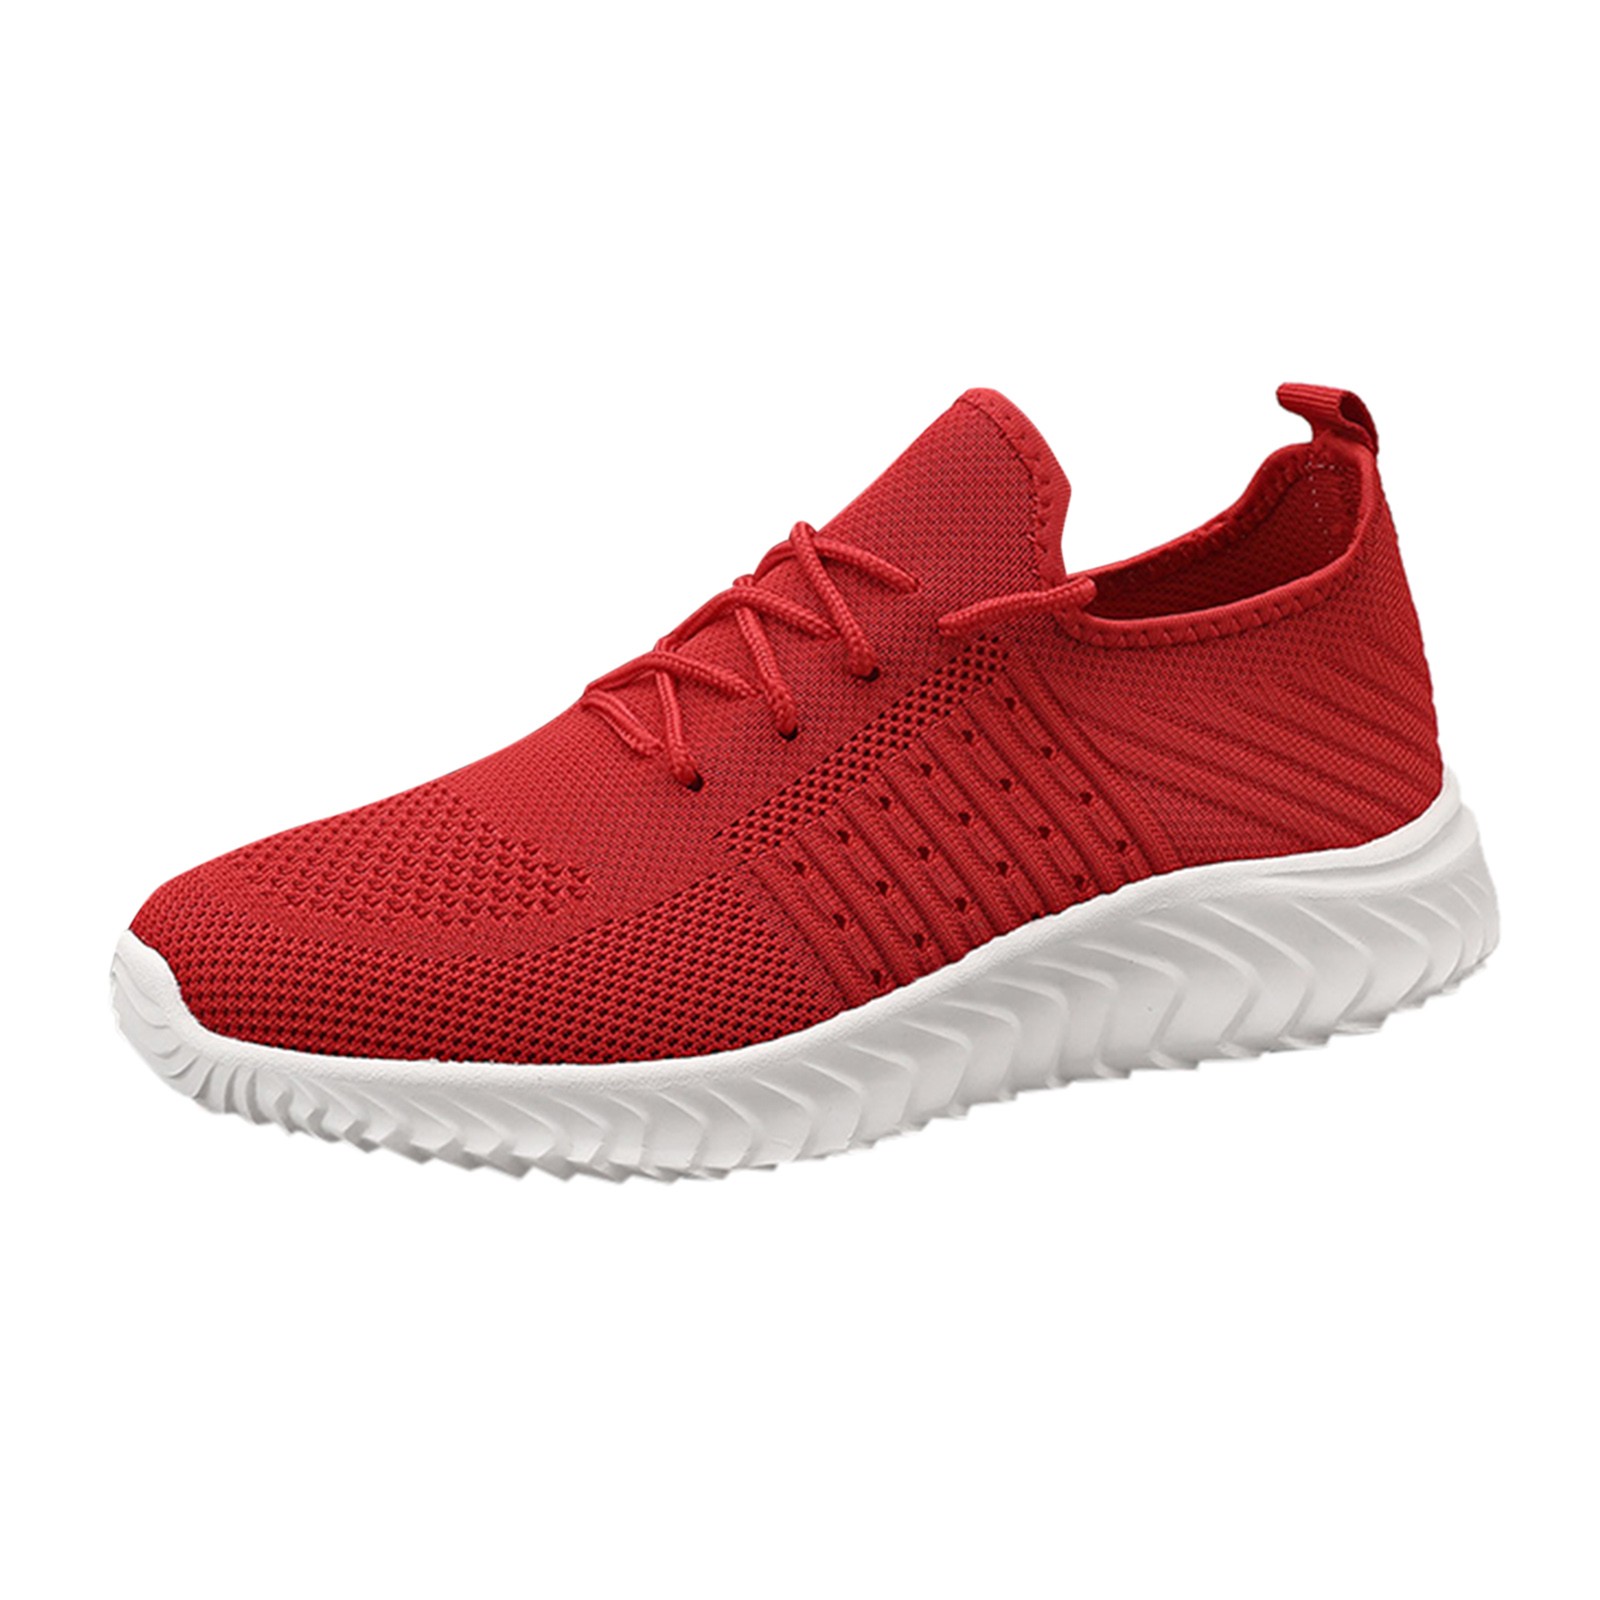 CBGELRT Shoes for Men Casual Men's Sneakers Work Tennis Shoes for Men Sneakers Men Lace Mesh Soft Fashion Color Bottom up Sport Shoes Casual Breathable Solid Men's Sneakers Male Red 45 - image 1 of 4